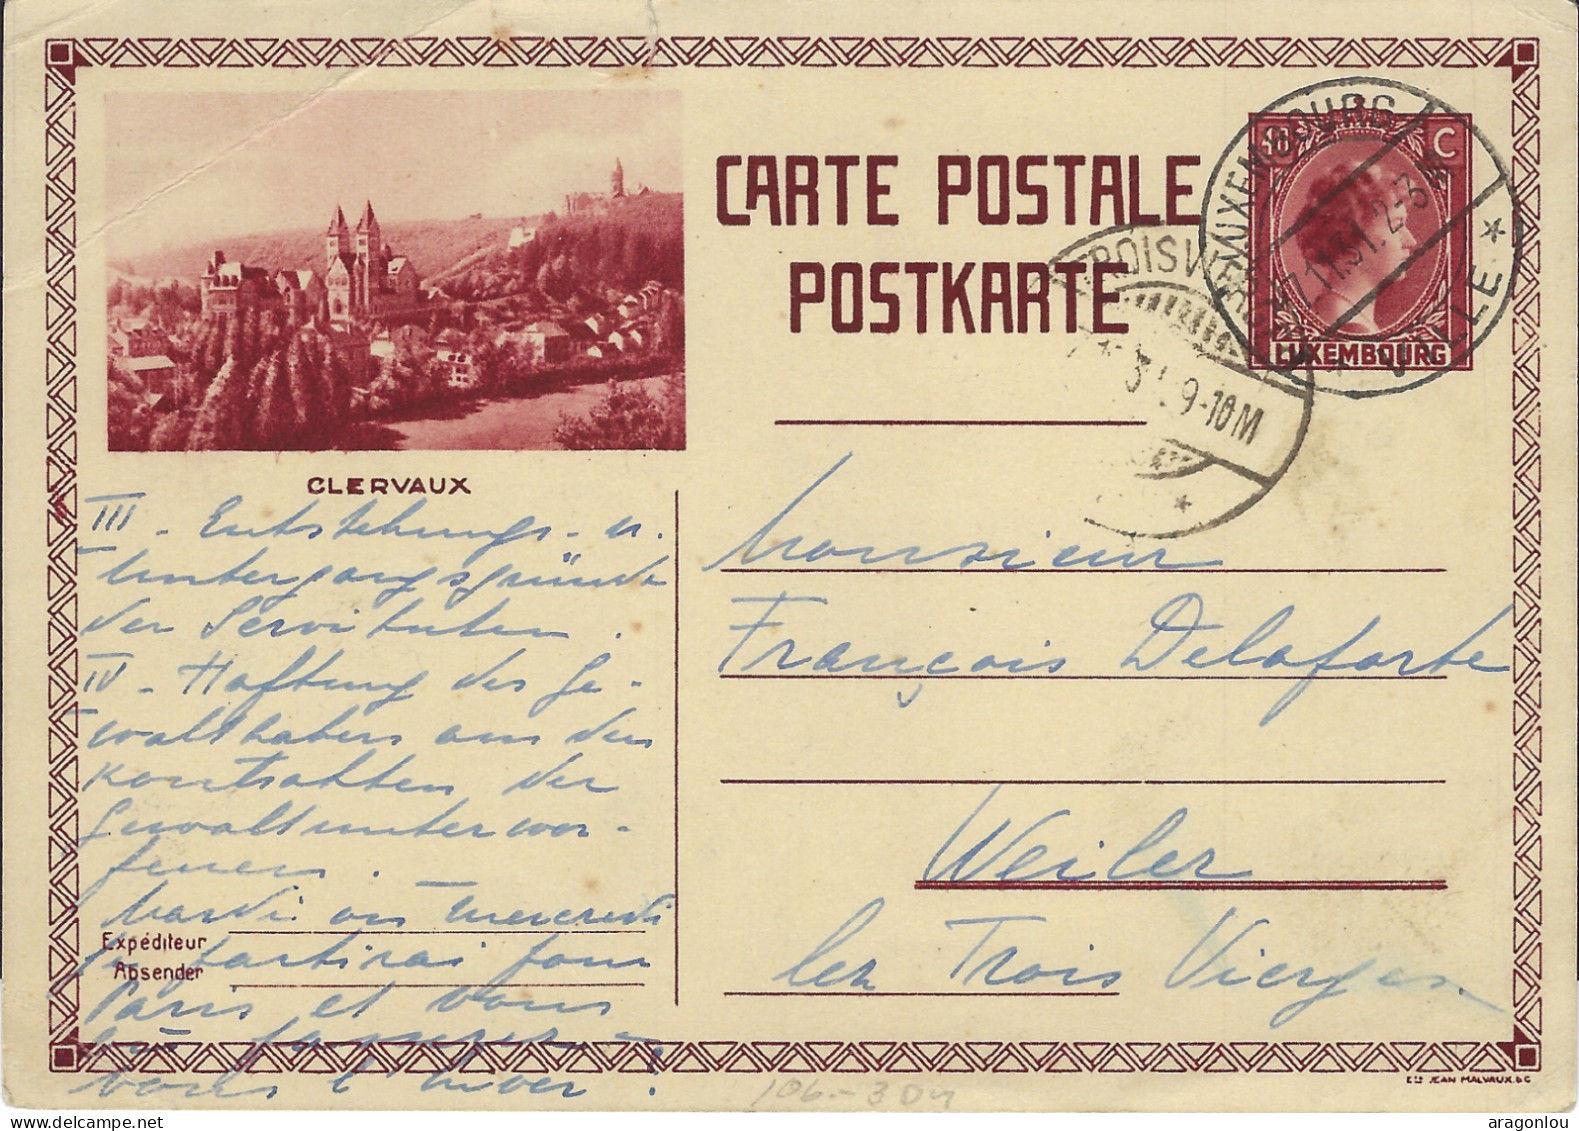 Luxembourg - Luxemburg - Carte-Postale  1931  -  Clervaux -   Cachet  Luxembourg - Stamped Stationery